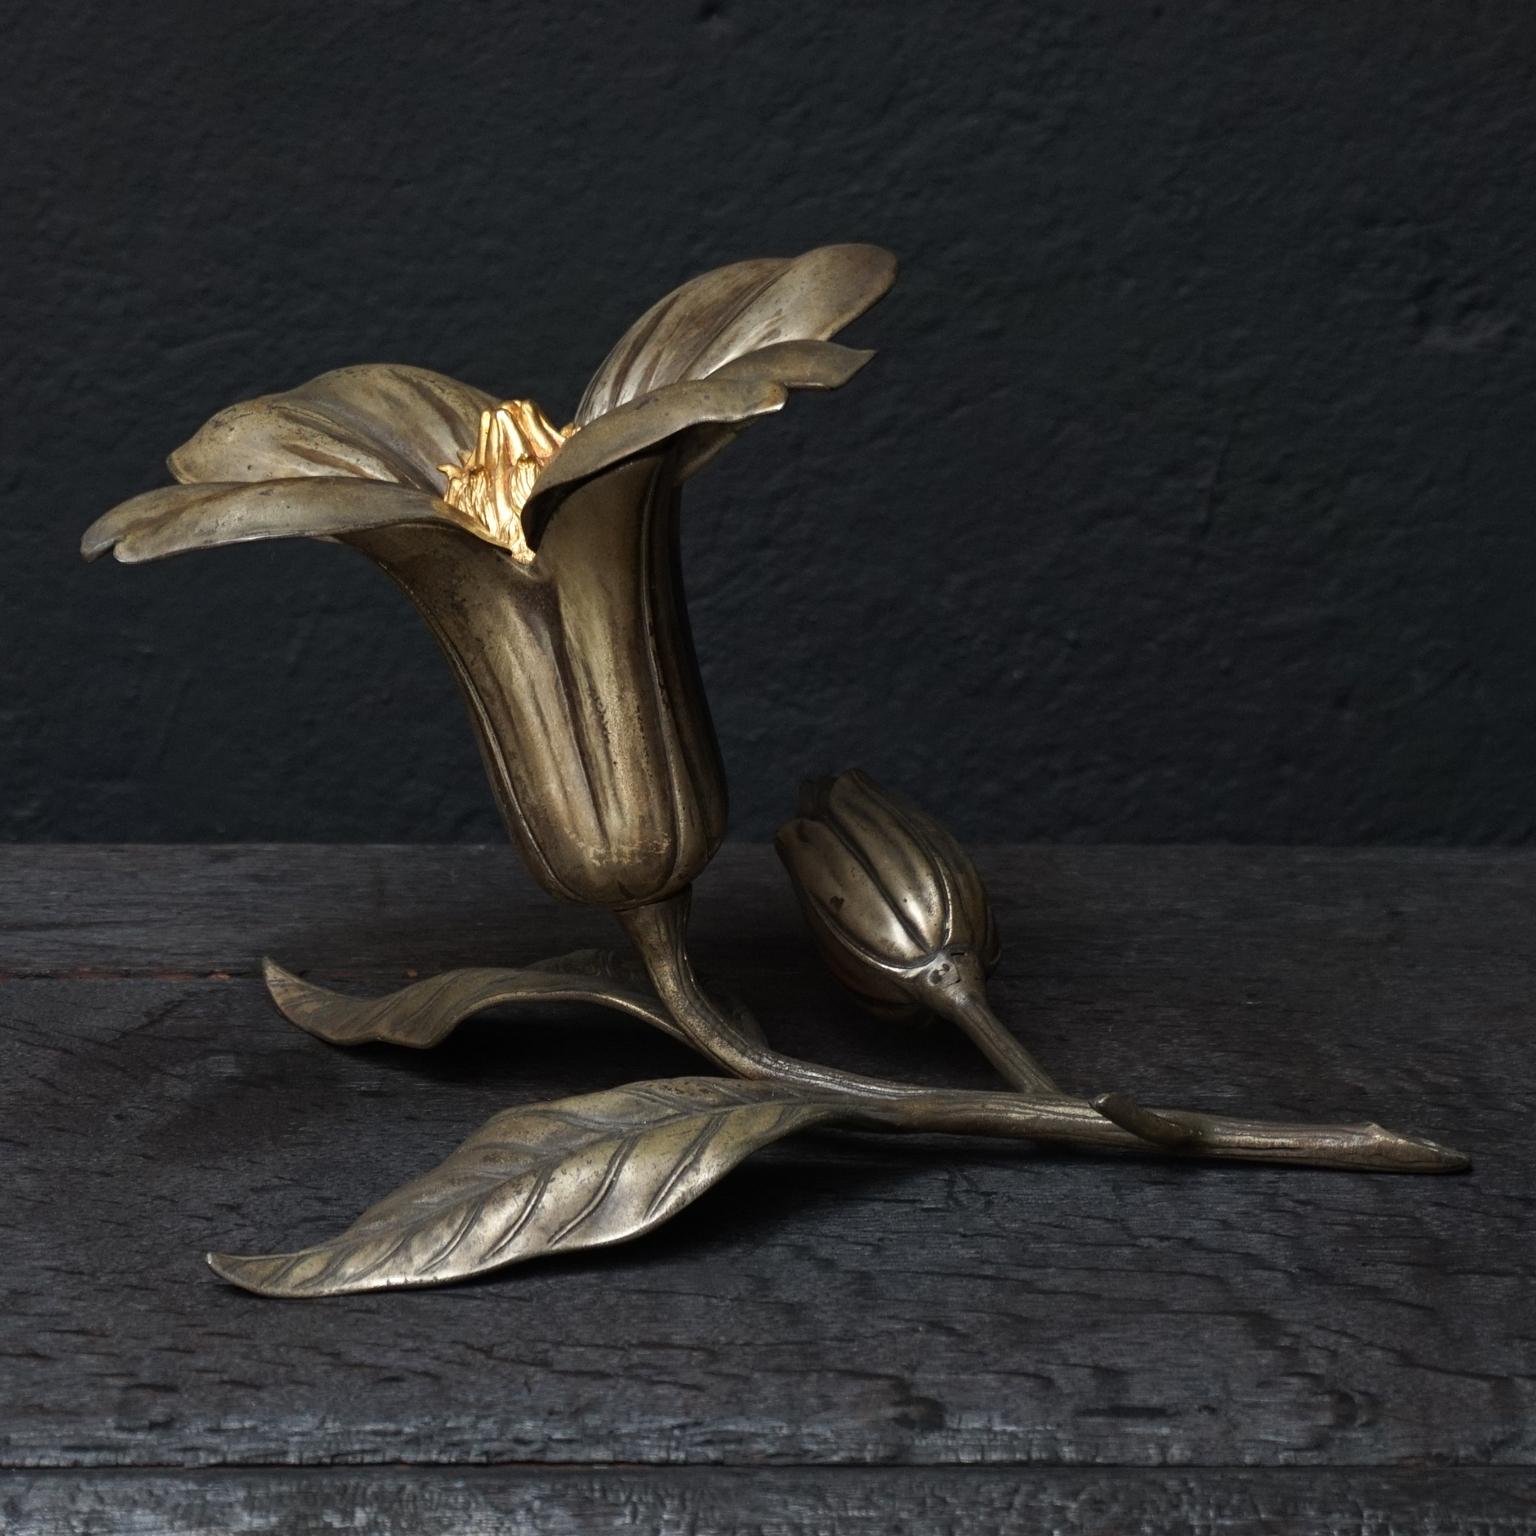 Unique heavy metal and brass floral removable petals ashtray with cigarette dispenser and matchstick holder flower bud from the Art Deco era.
The four petals of the flower remove easily, and when flipped over become ashtrays. 
In the flower heart